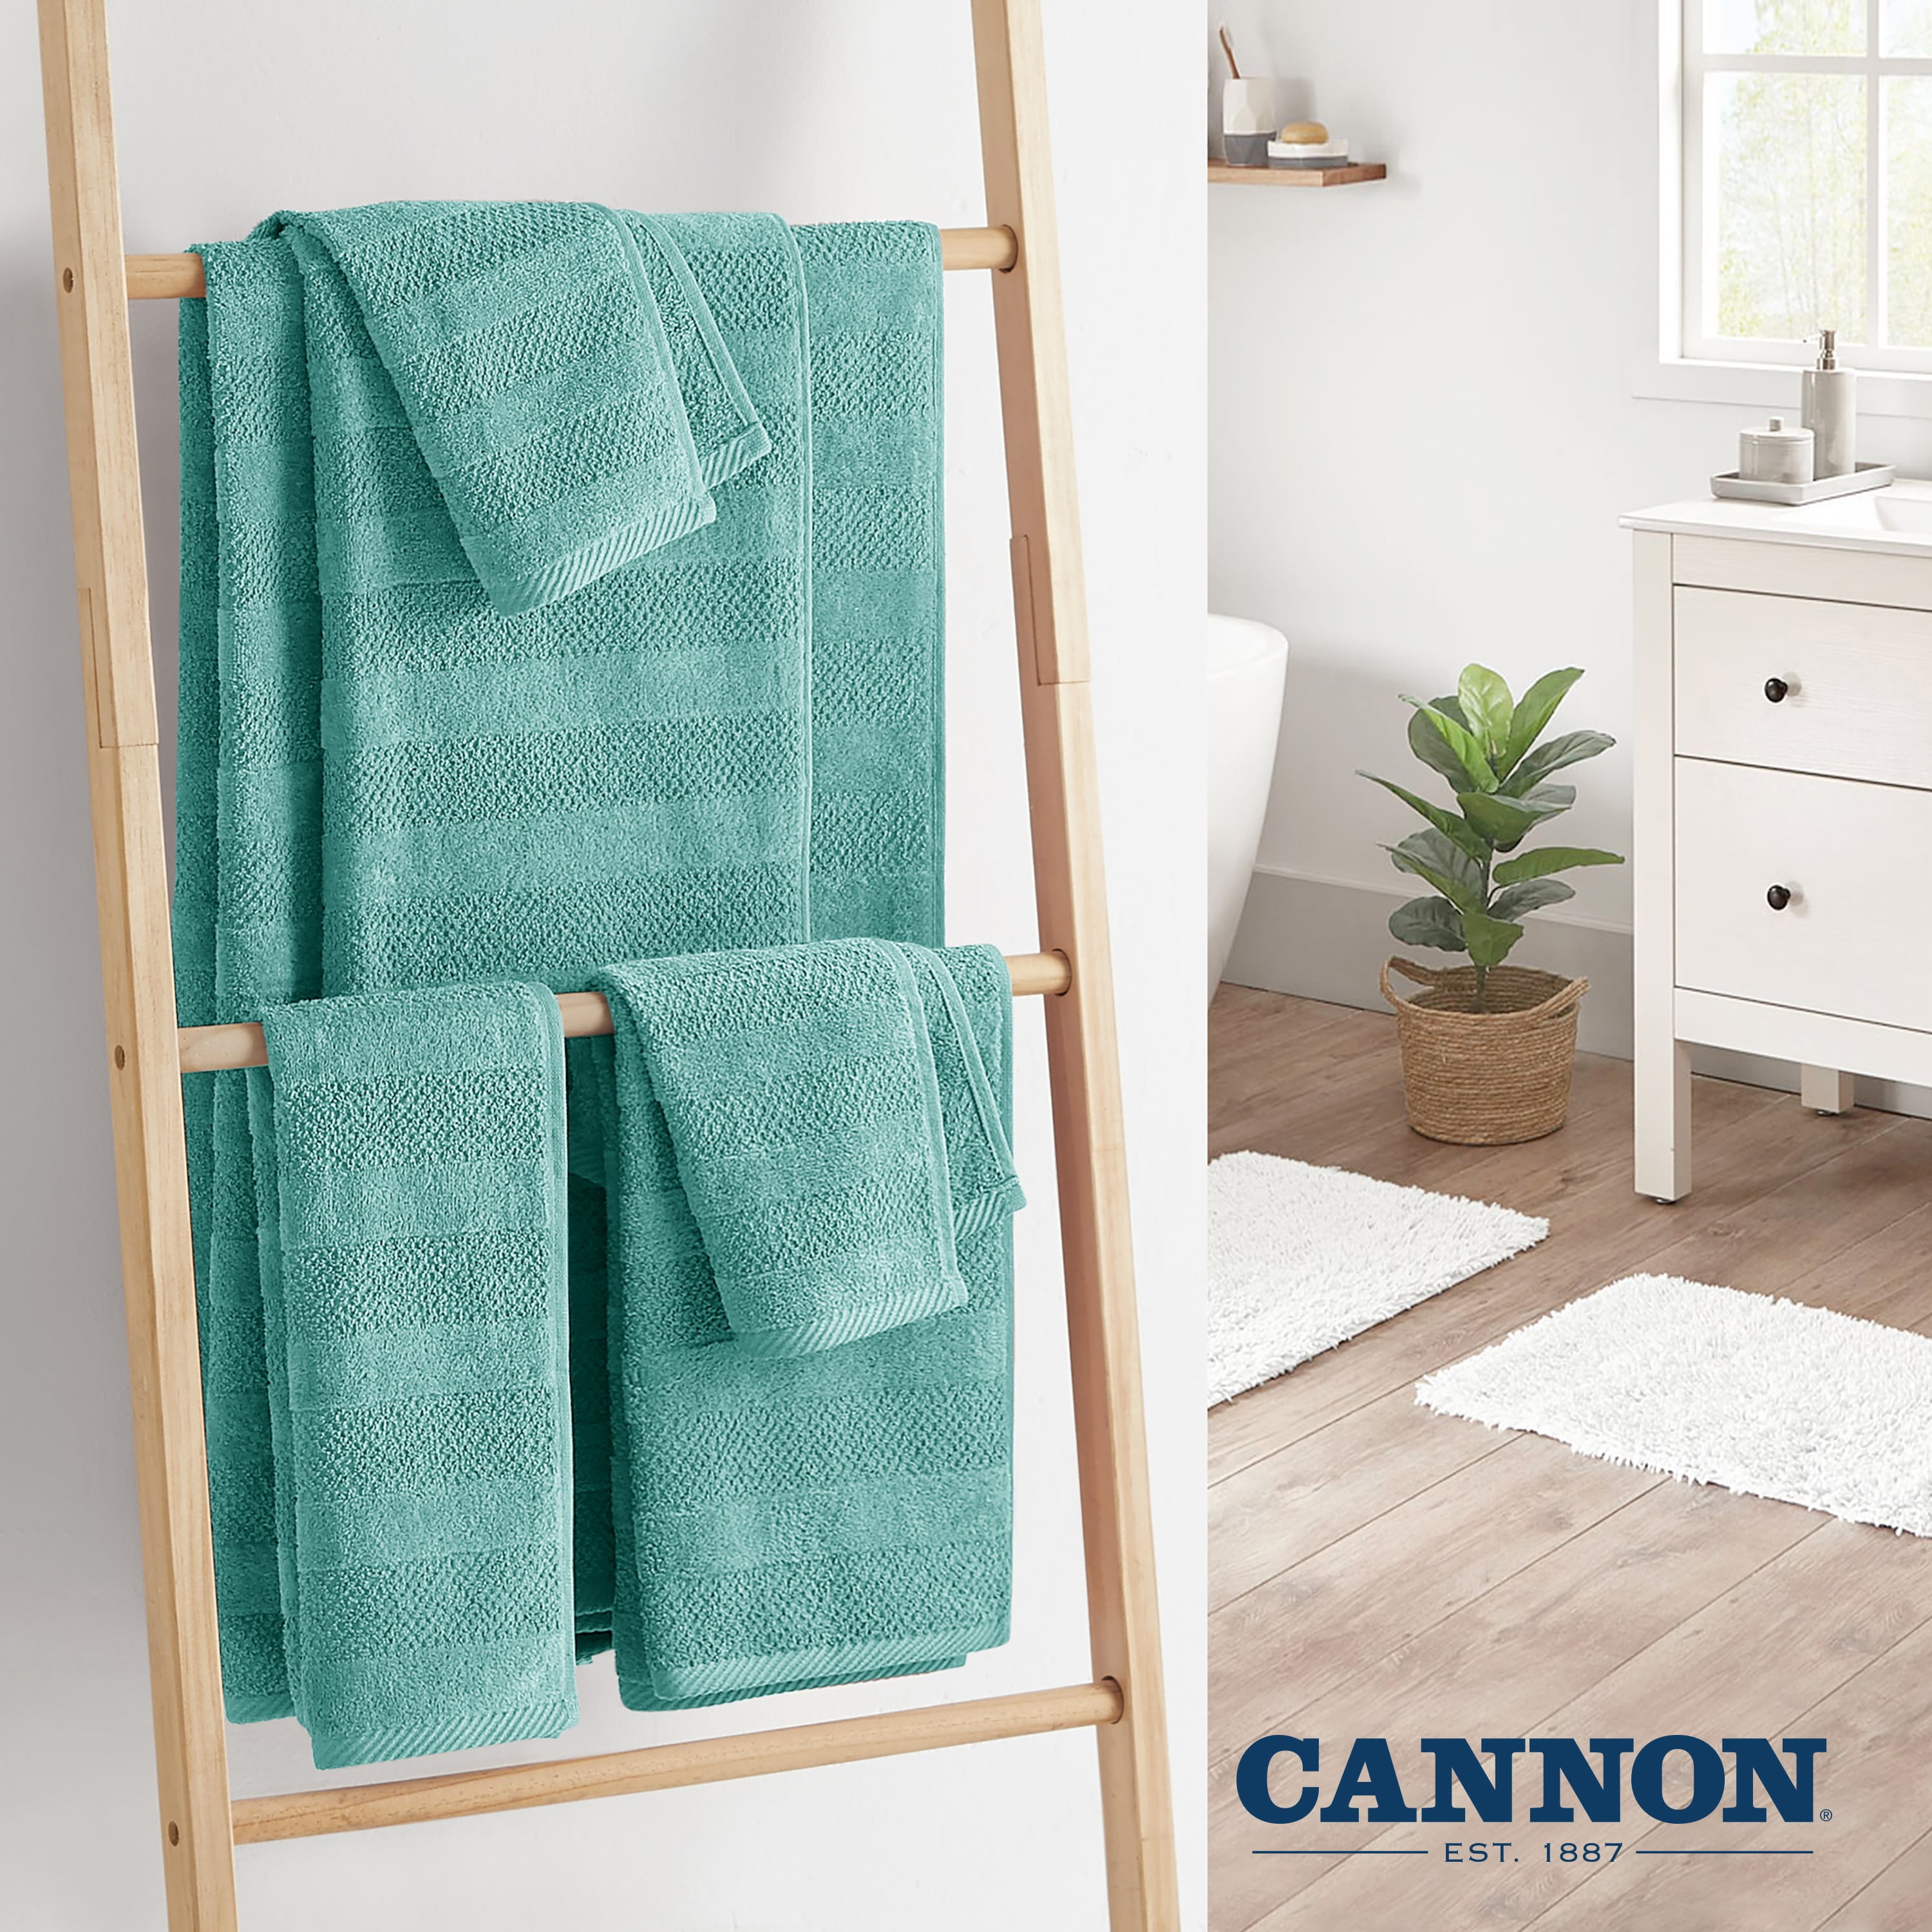 CANNON Luxury 100% Cotton Zero Twist Hand Towels (16 L x 28 W), 500 GSM,  Aero Spun, Dobby Hemmed Borders, Super Soft, Thick & Highly Absorbent, Easy